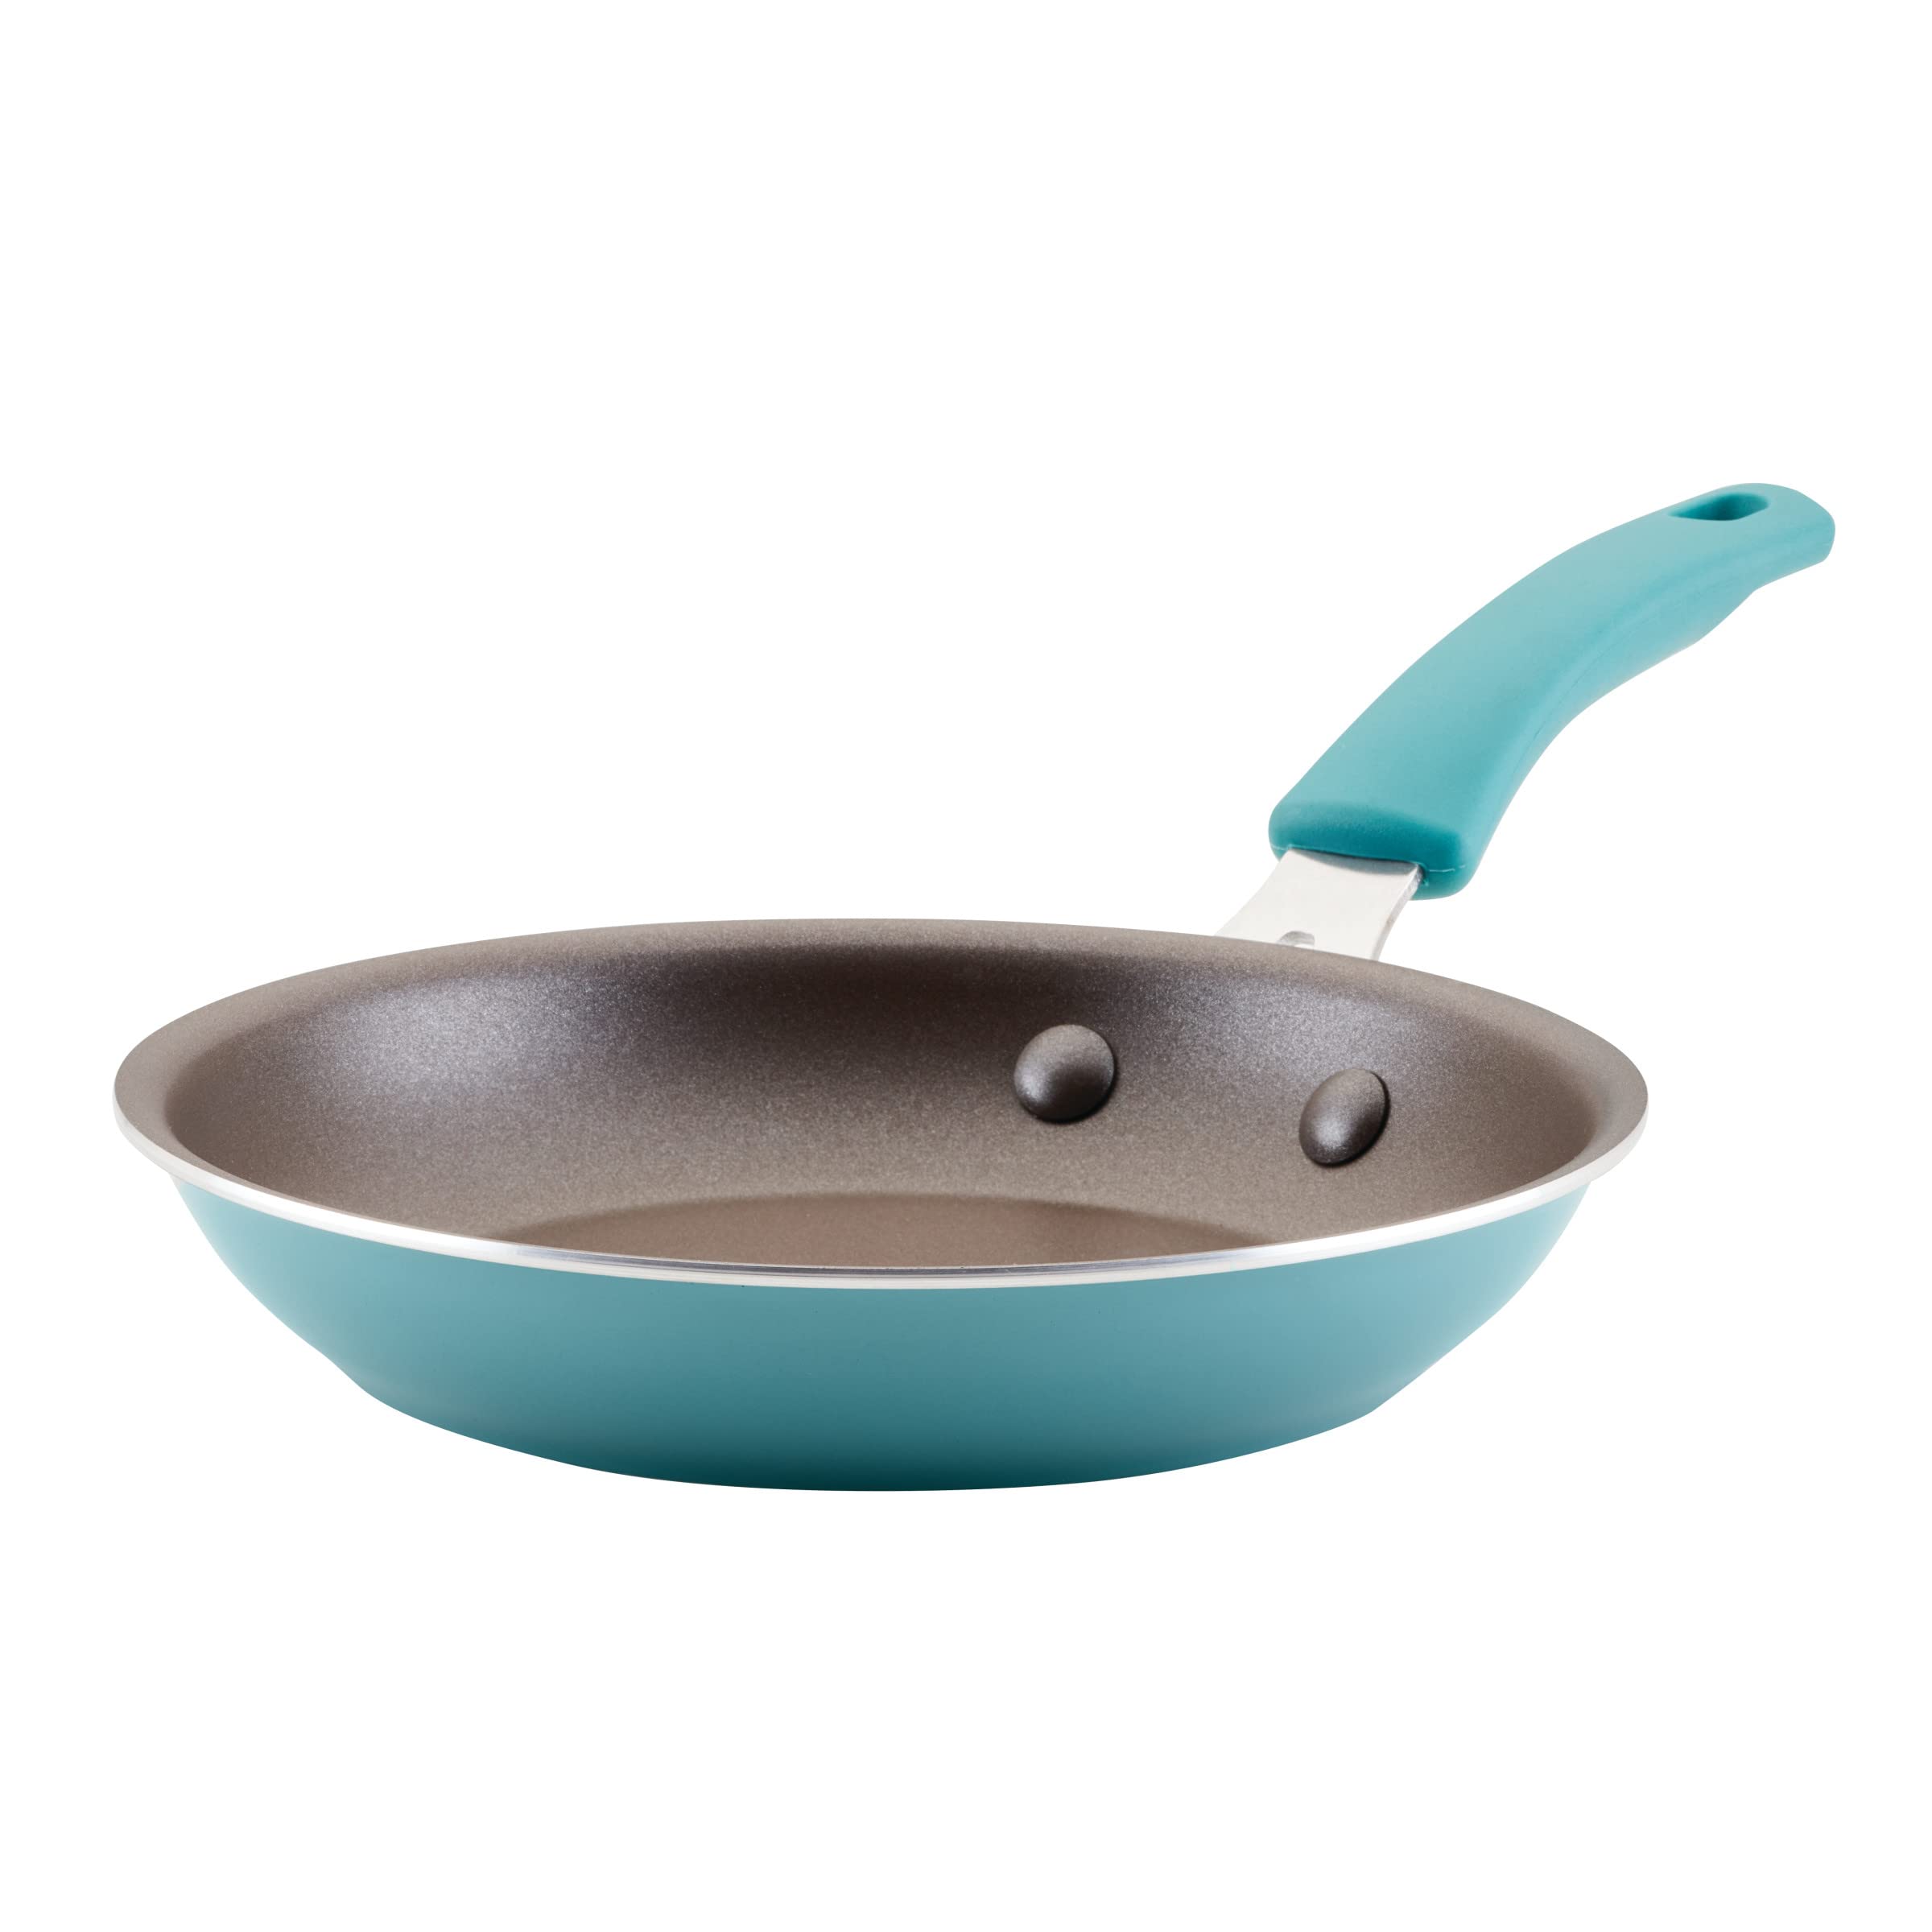 Rachael Ray Cook + Create Nonstick Frying Pan/Skillet, 8.5 Inch, Agave Blue